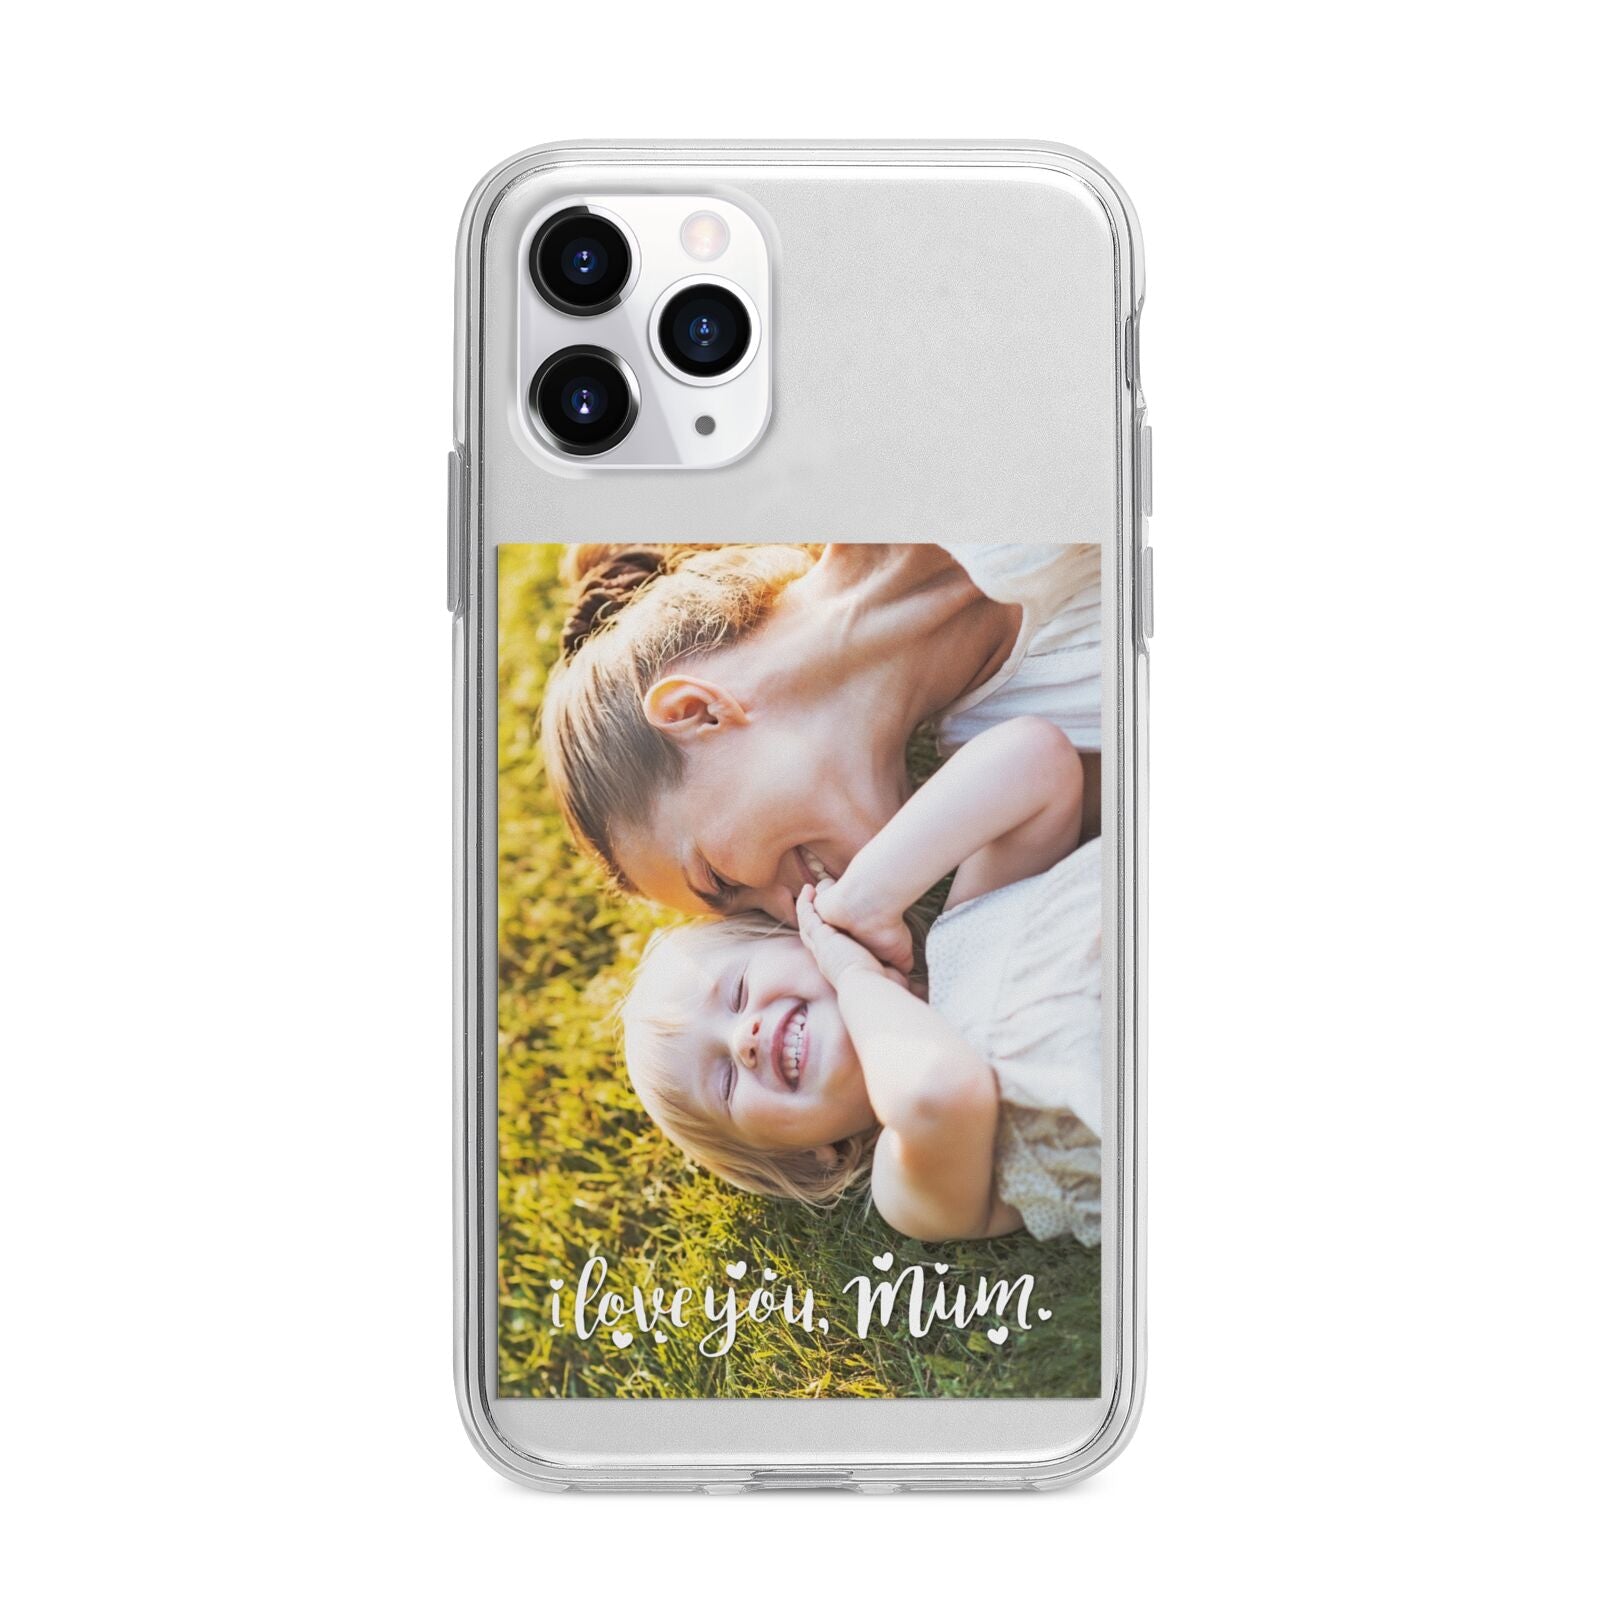 Love You Mum Photo Upload Apple iPhone 11 Pro in Silver with Bumper Case